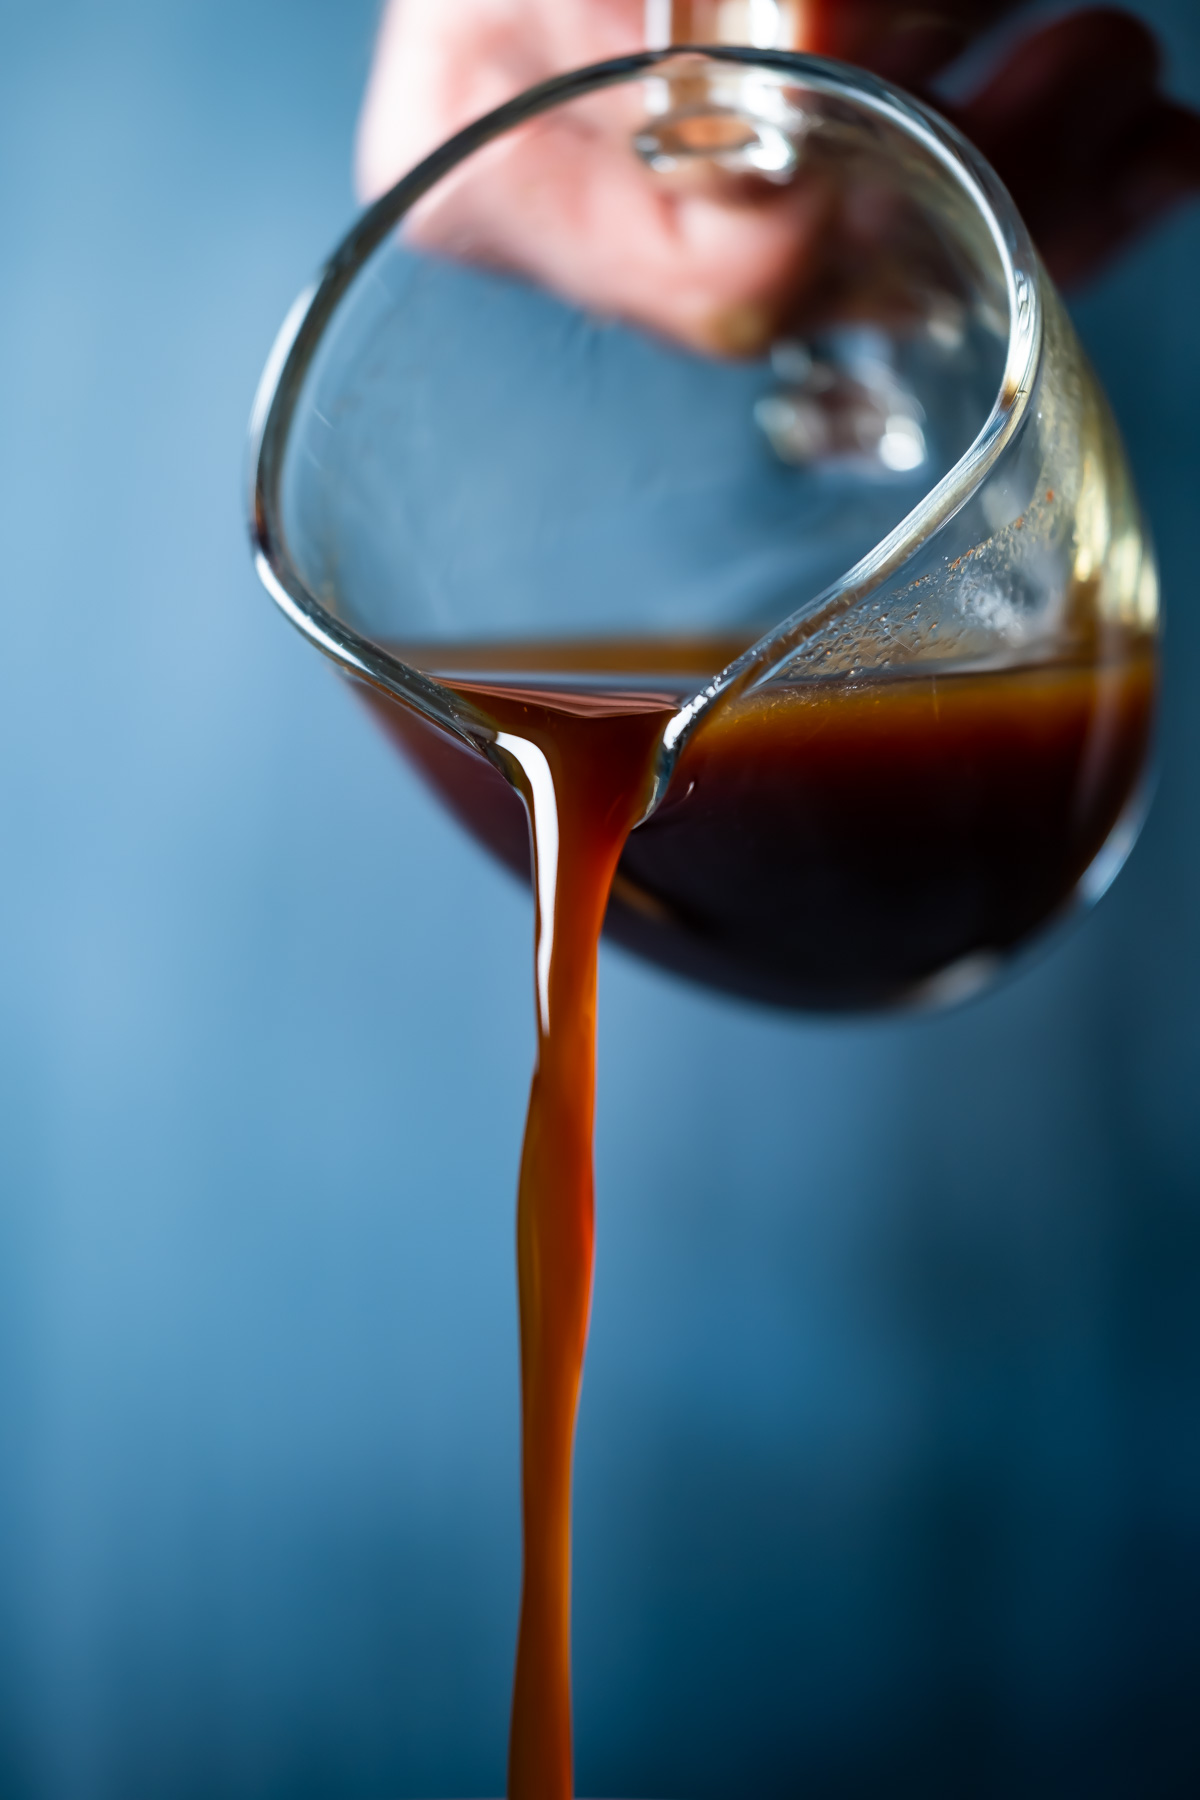 Vegan worcestershire sauce pouring from a glass jug.